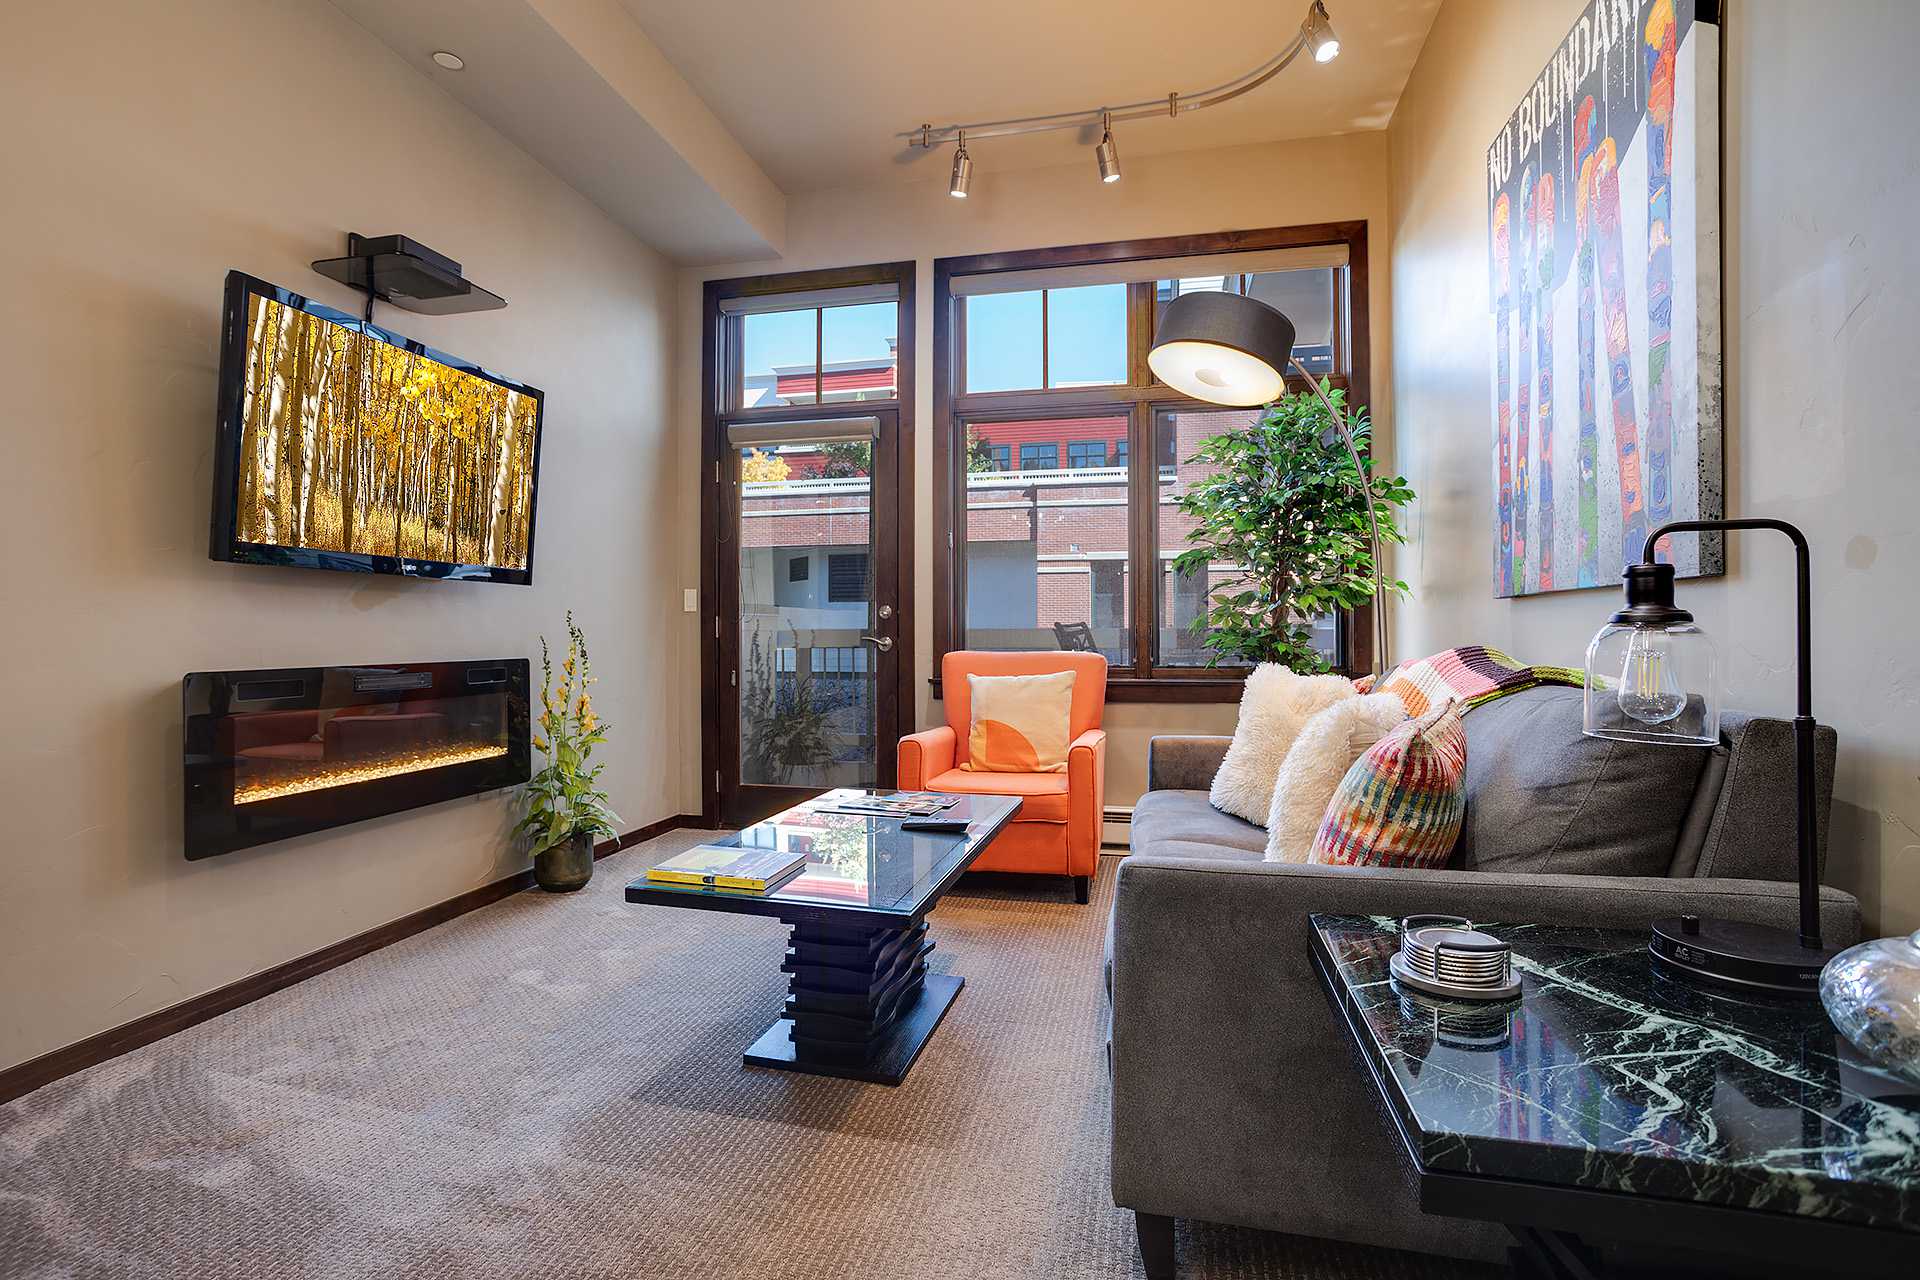 H209A by Pioneer Ridge: Great Downtown Location + Free City Bus + Walk to Shops & Restaurants